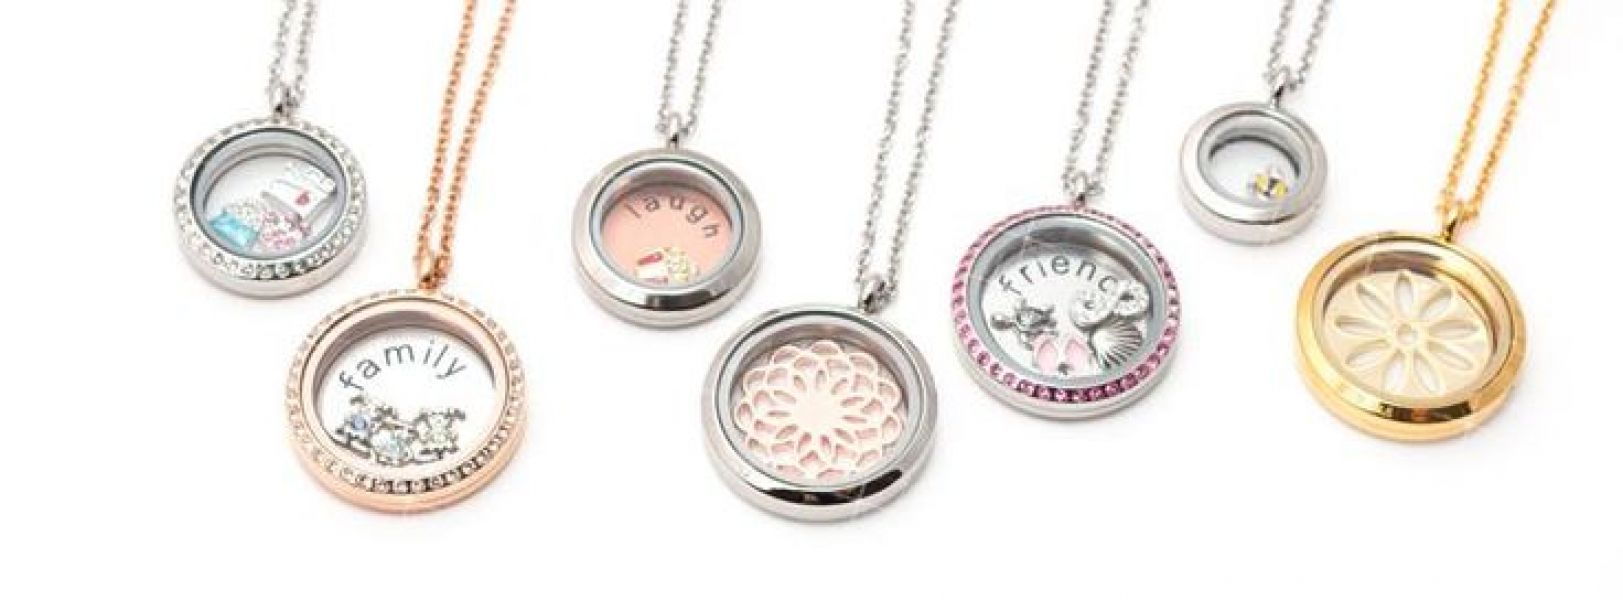 Gorgeous Locket you choose your design! A beautiful end of winter treat!  